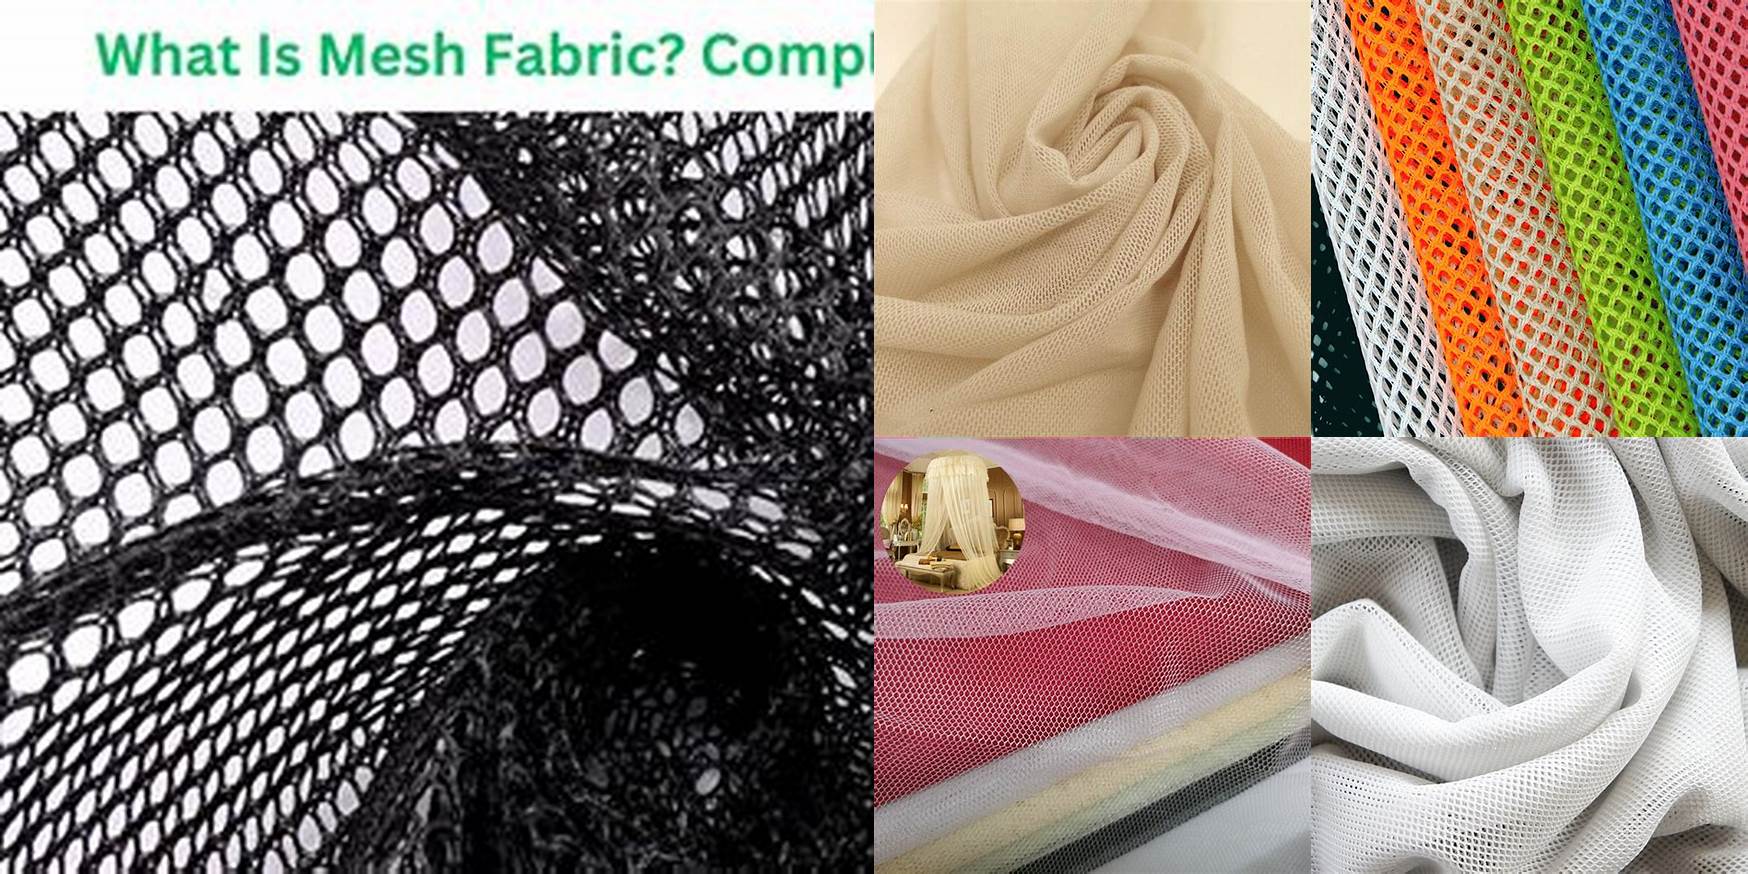 What Is Mesh Fabric Made Of